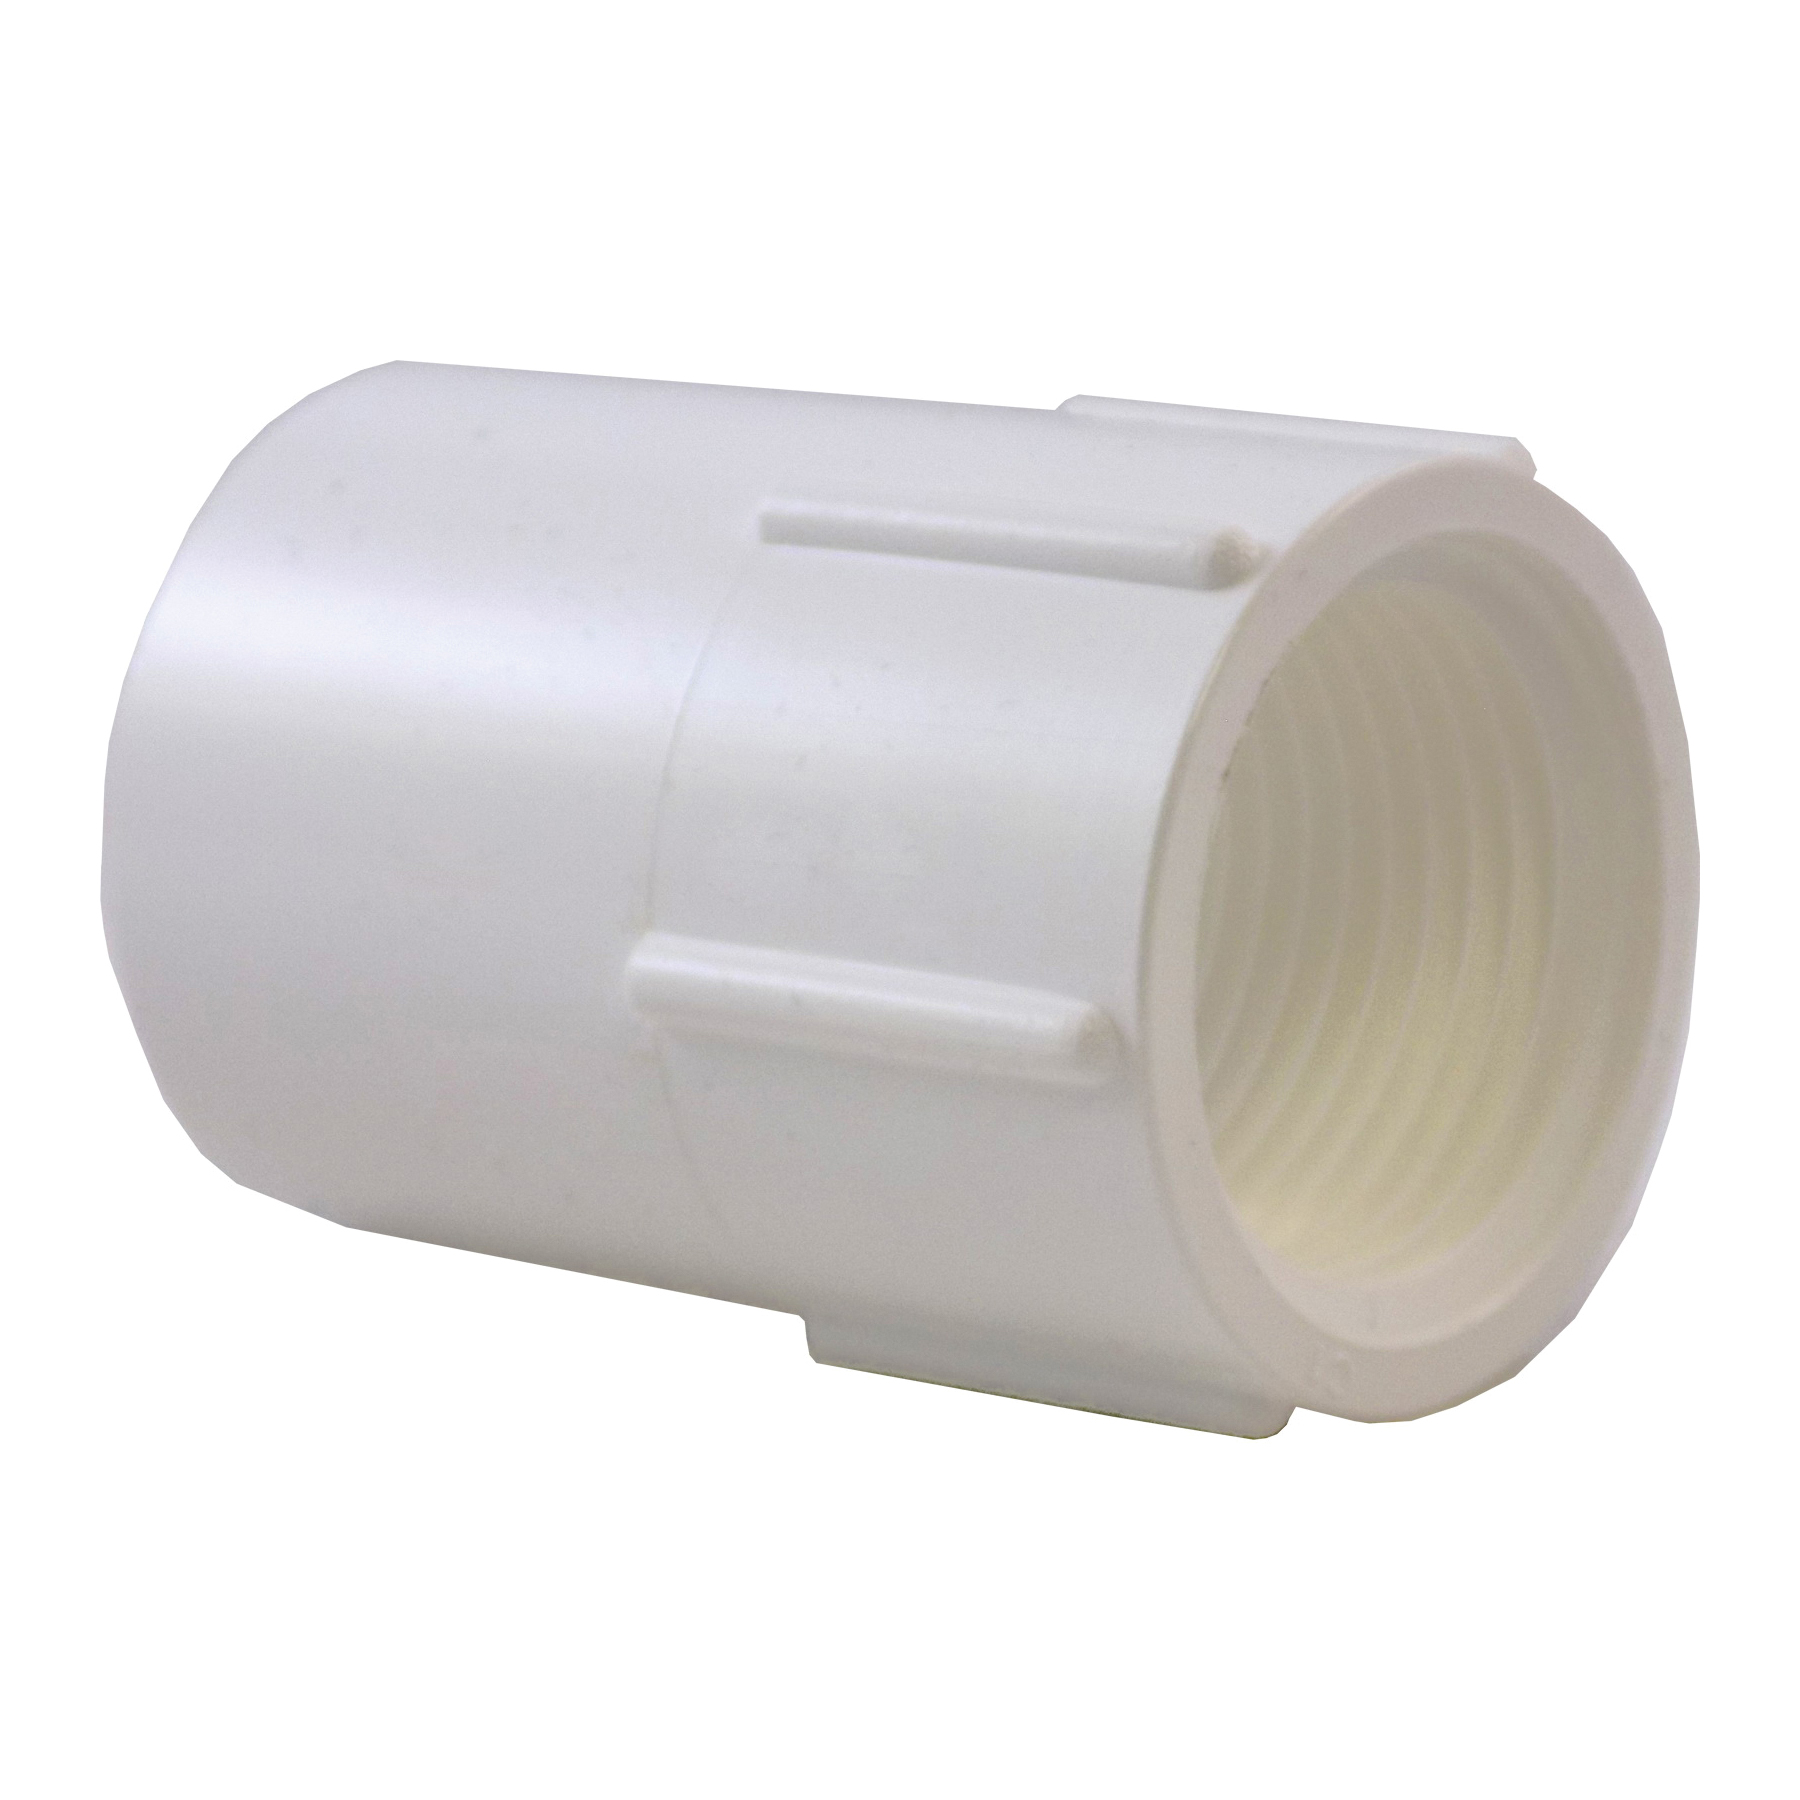 PVC PIPE 3/4 IN OD COUPLING ADAPTER FEMALE FPT SCH 40